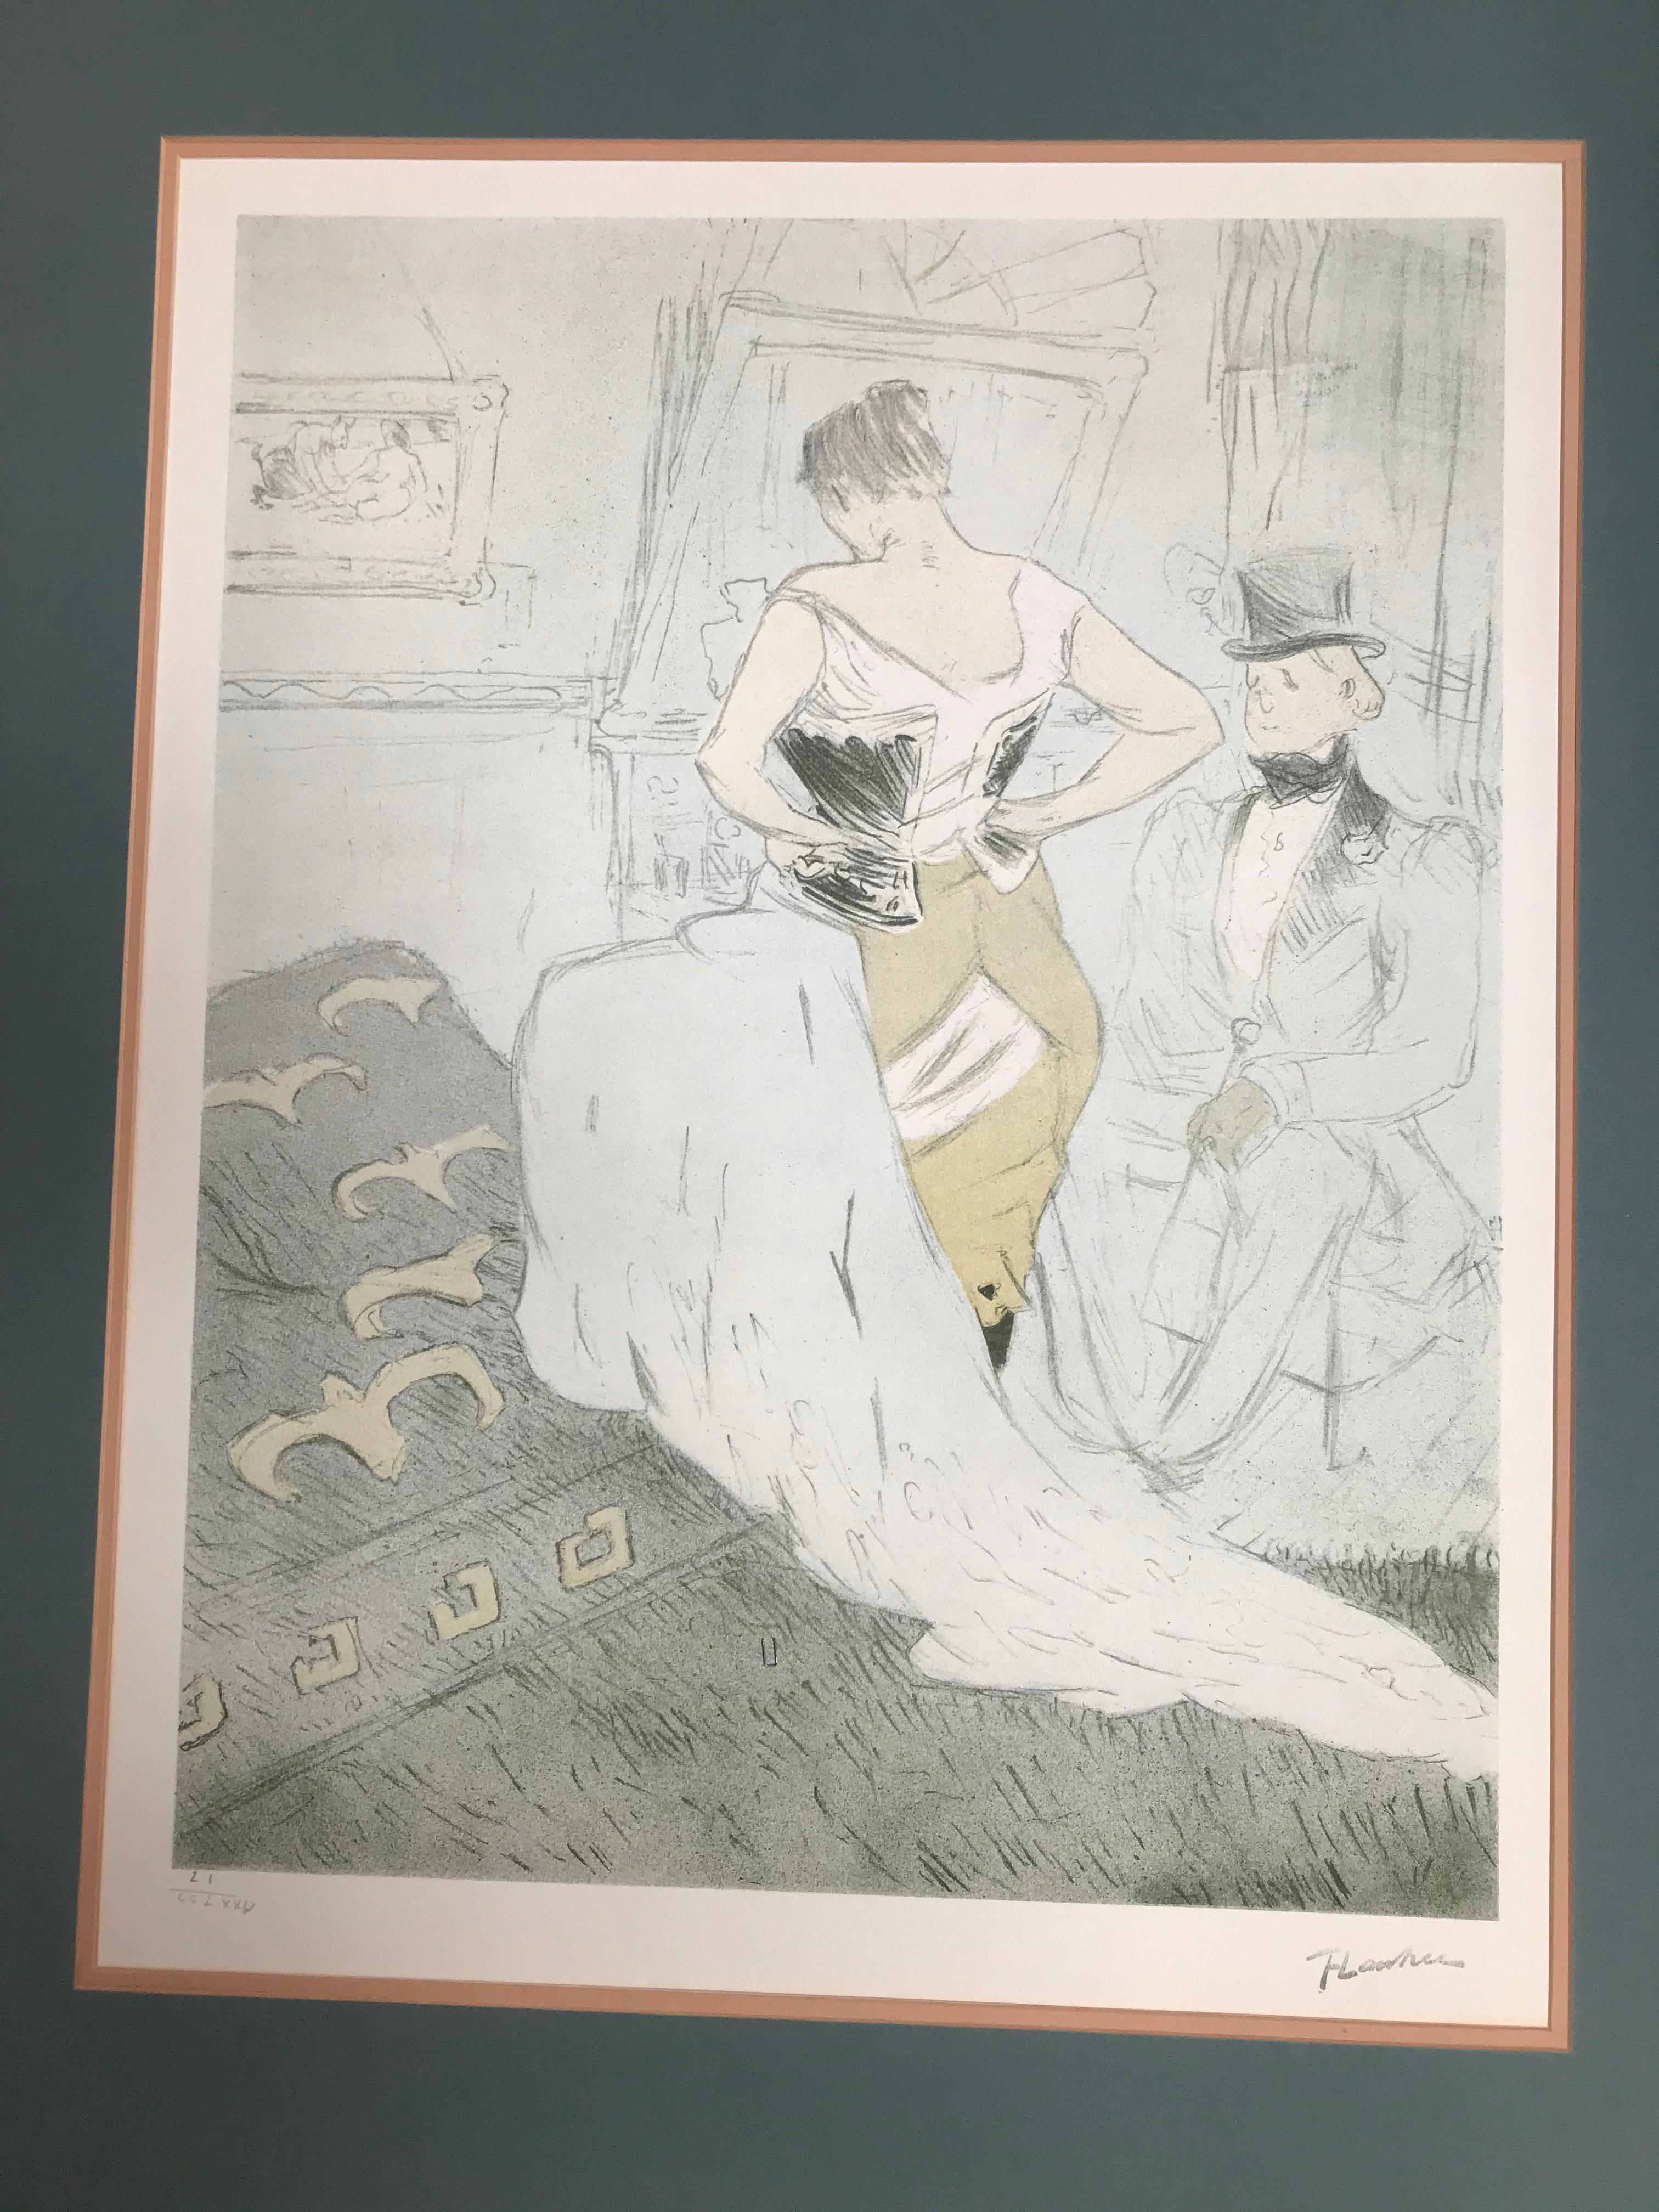 Toulouse-Lautrec is among the best-known painters of the Post-Impressionist period.
This lithograph is part of one series named 